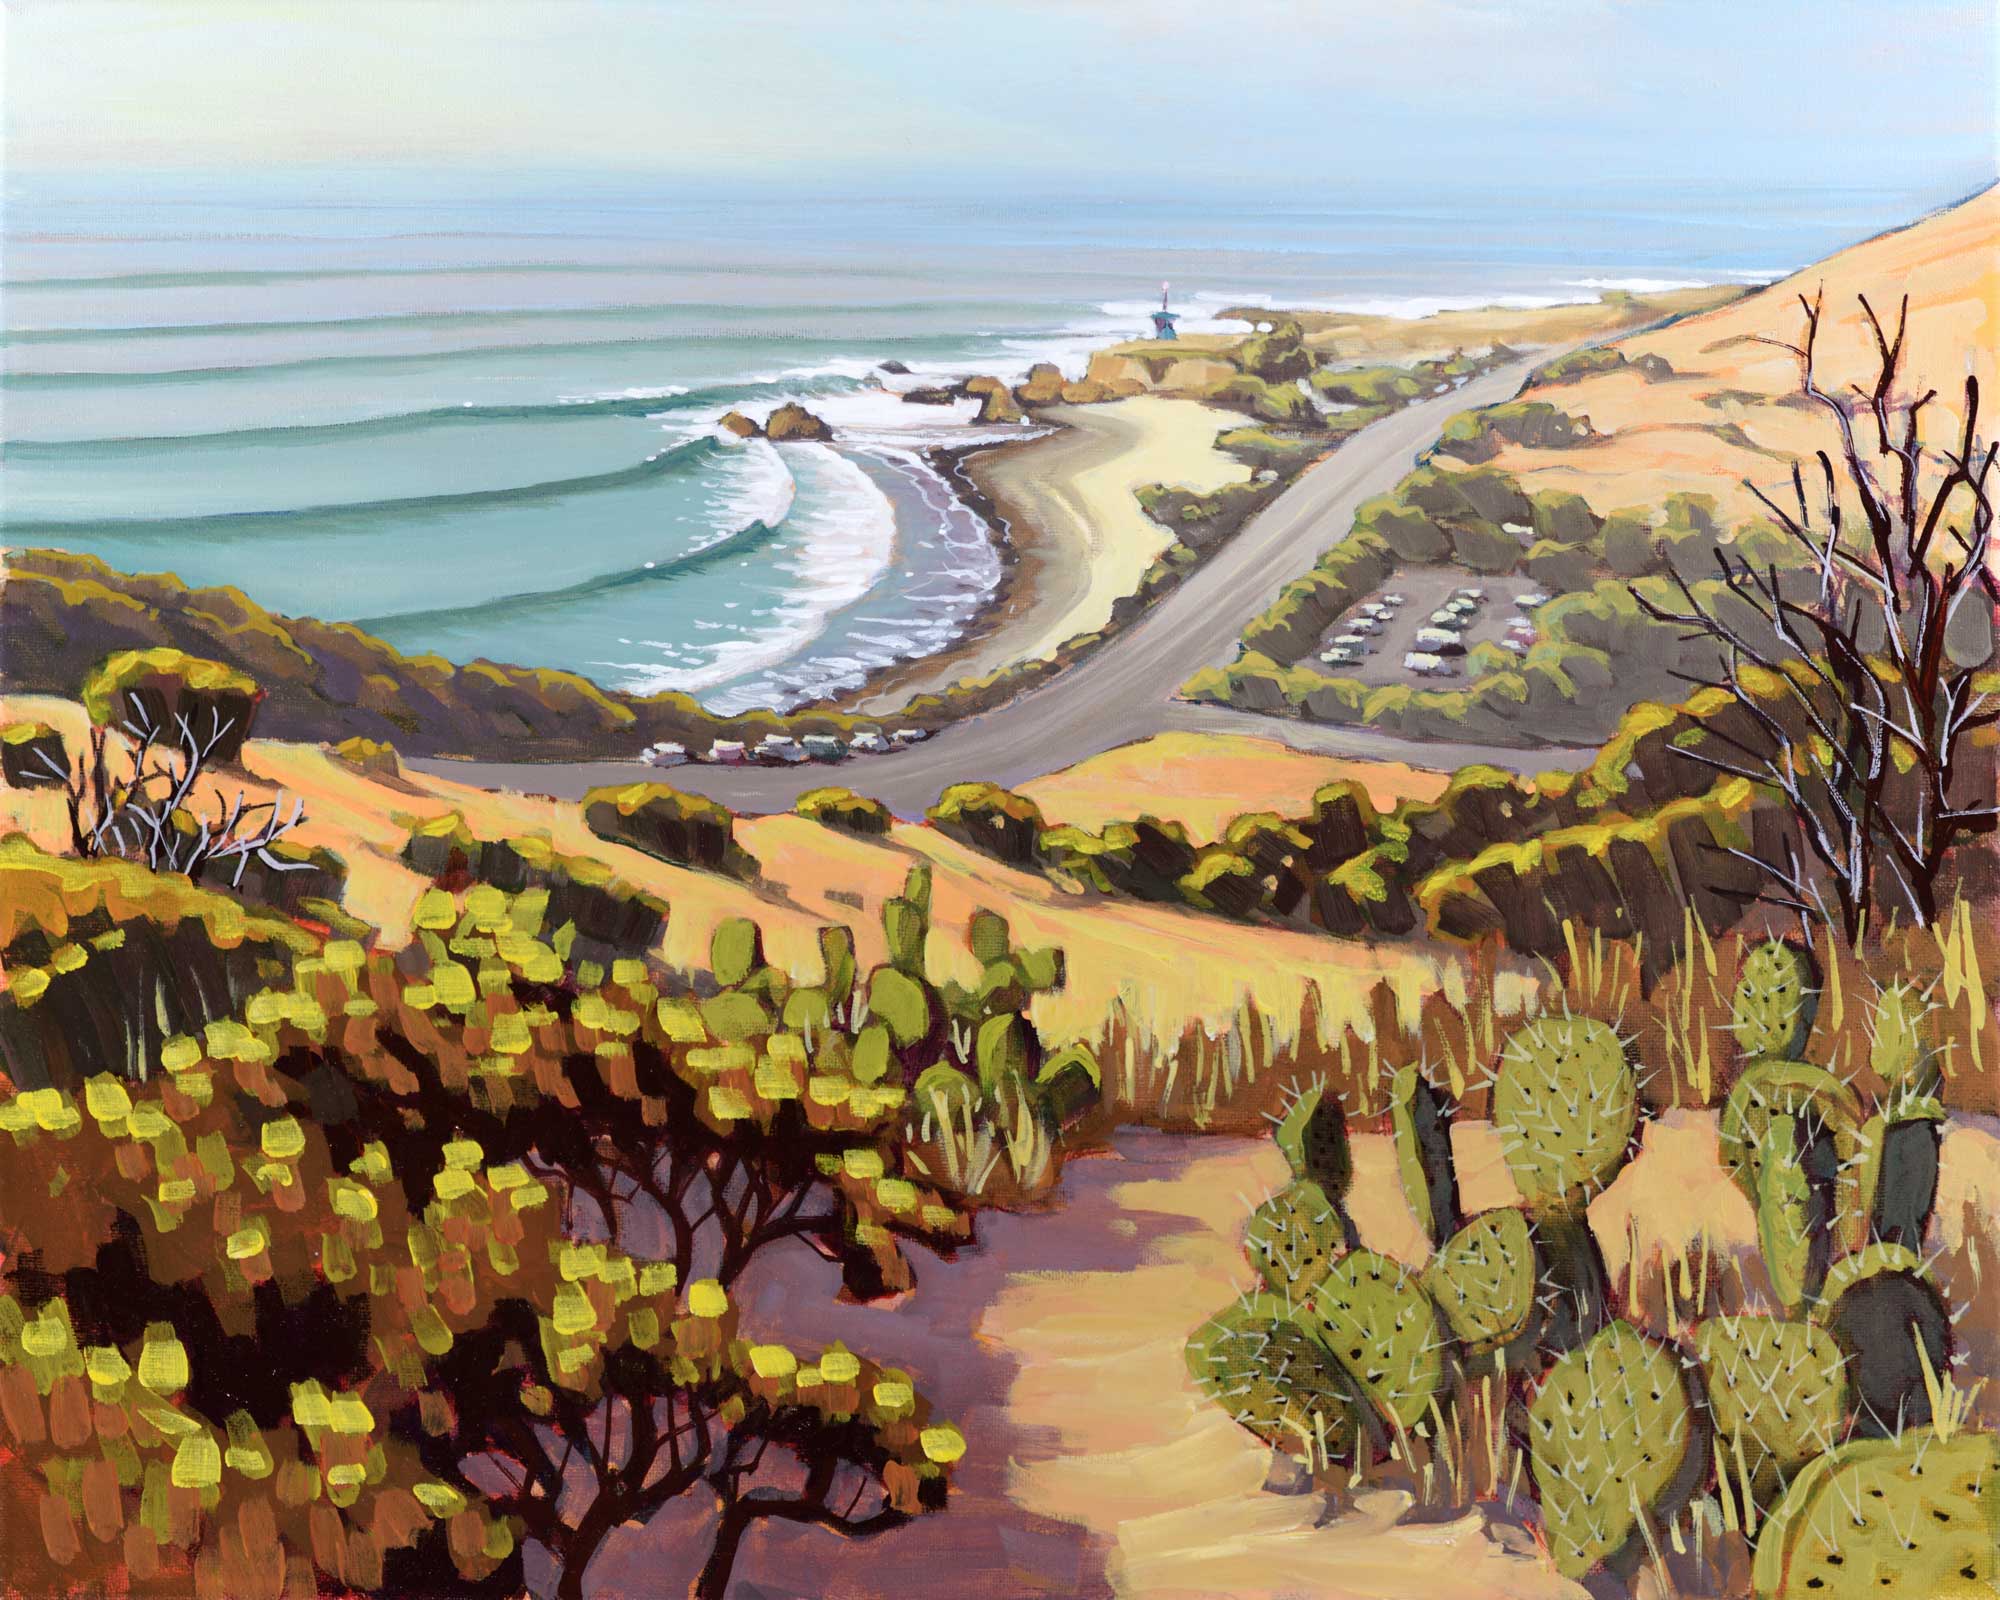 Plein air artwork of Leo Carillo State Park on the Malibu coast of los angeles county in southern California